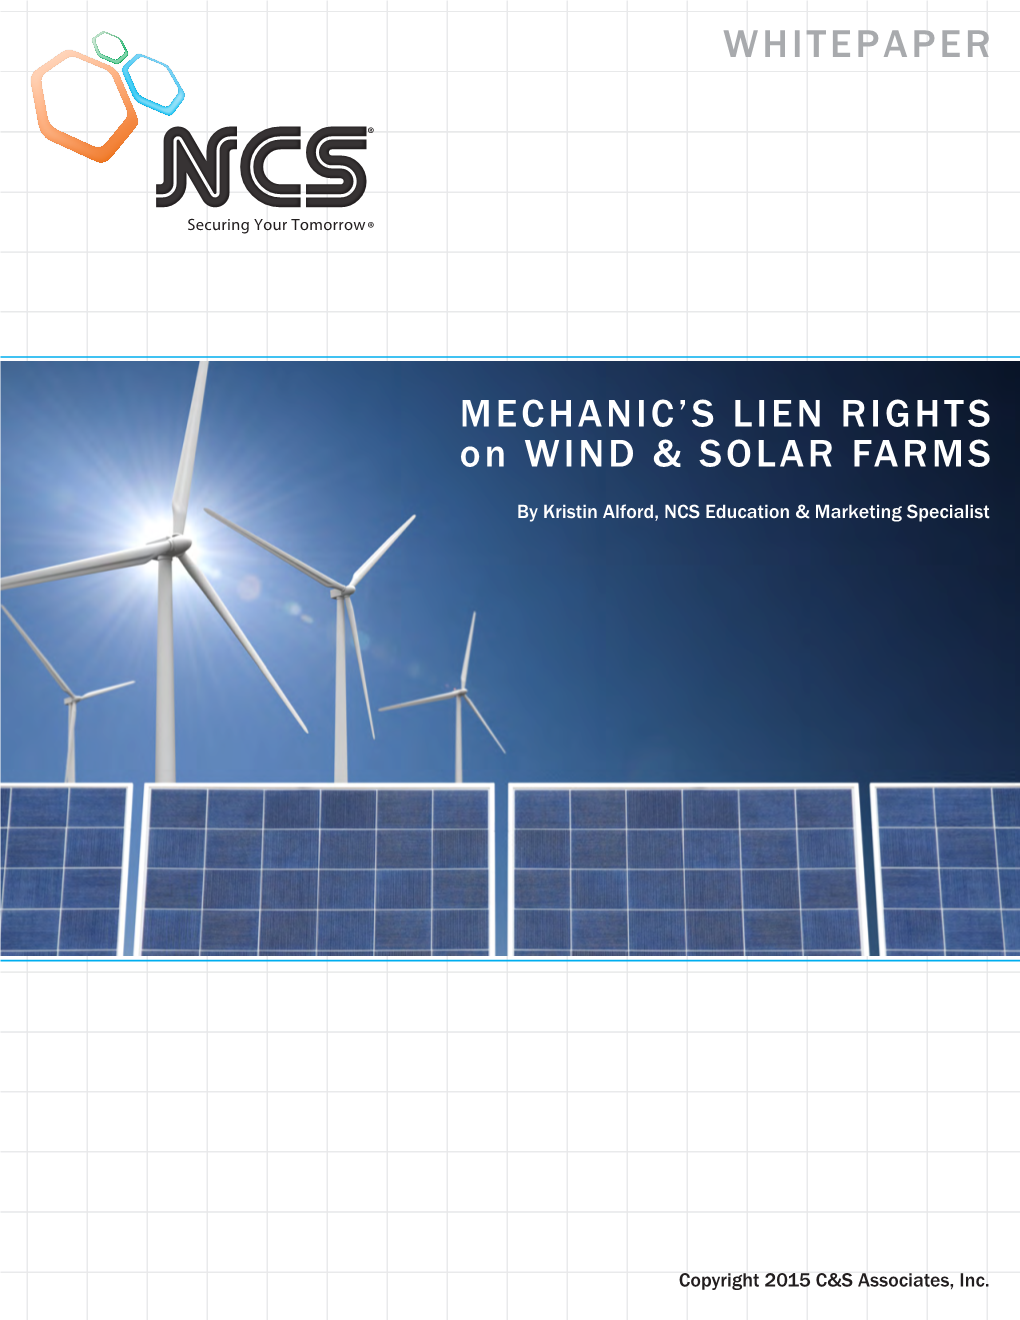 WHITEPAPER MECHANIC's LIEN RIGHTS on WIND & SOLAR FARMS